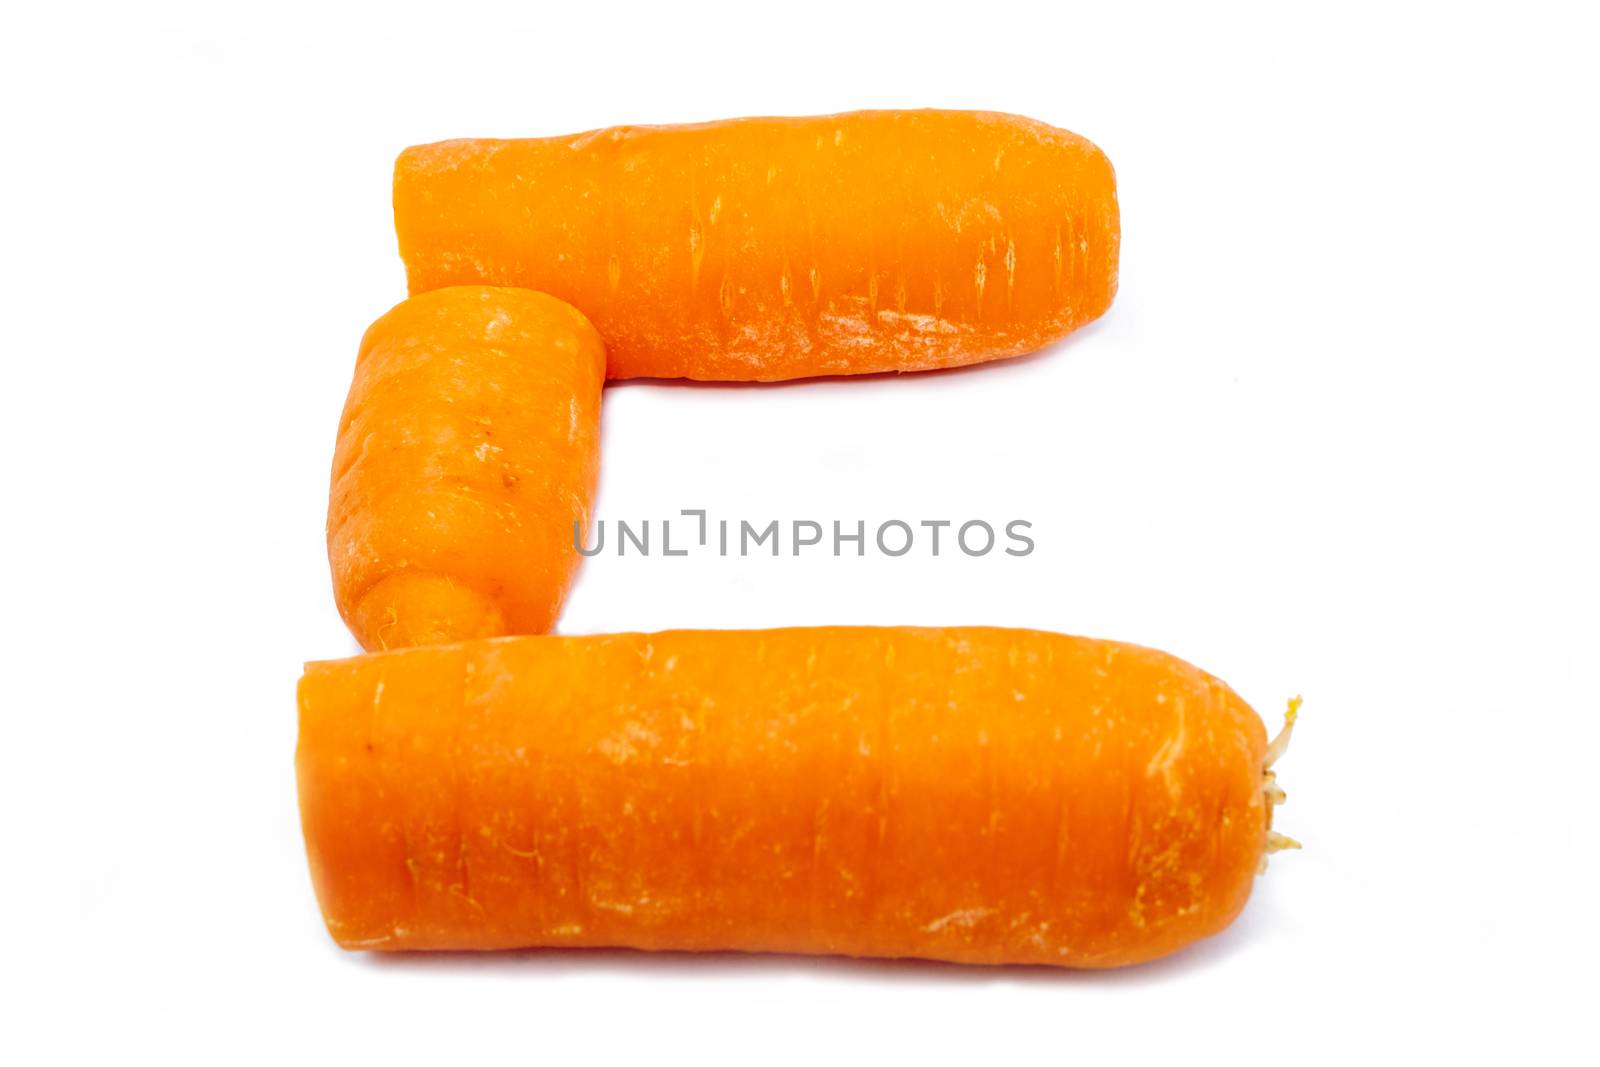 The C is a carrot. Bright capital letter C made of round carrot slices at white background